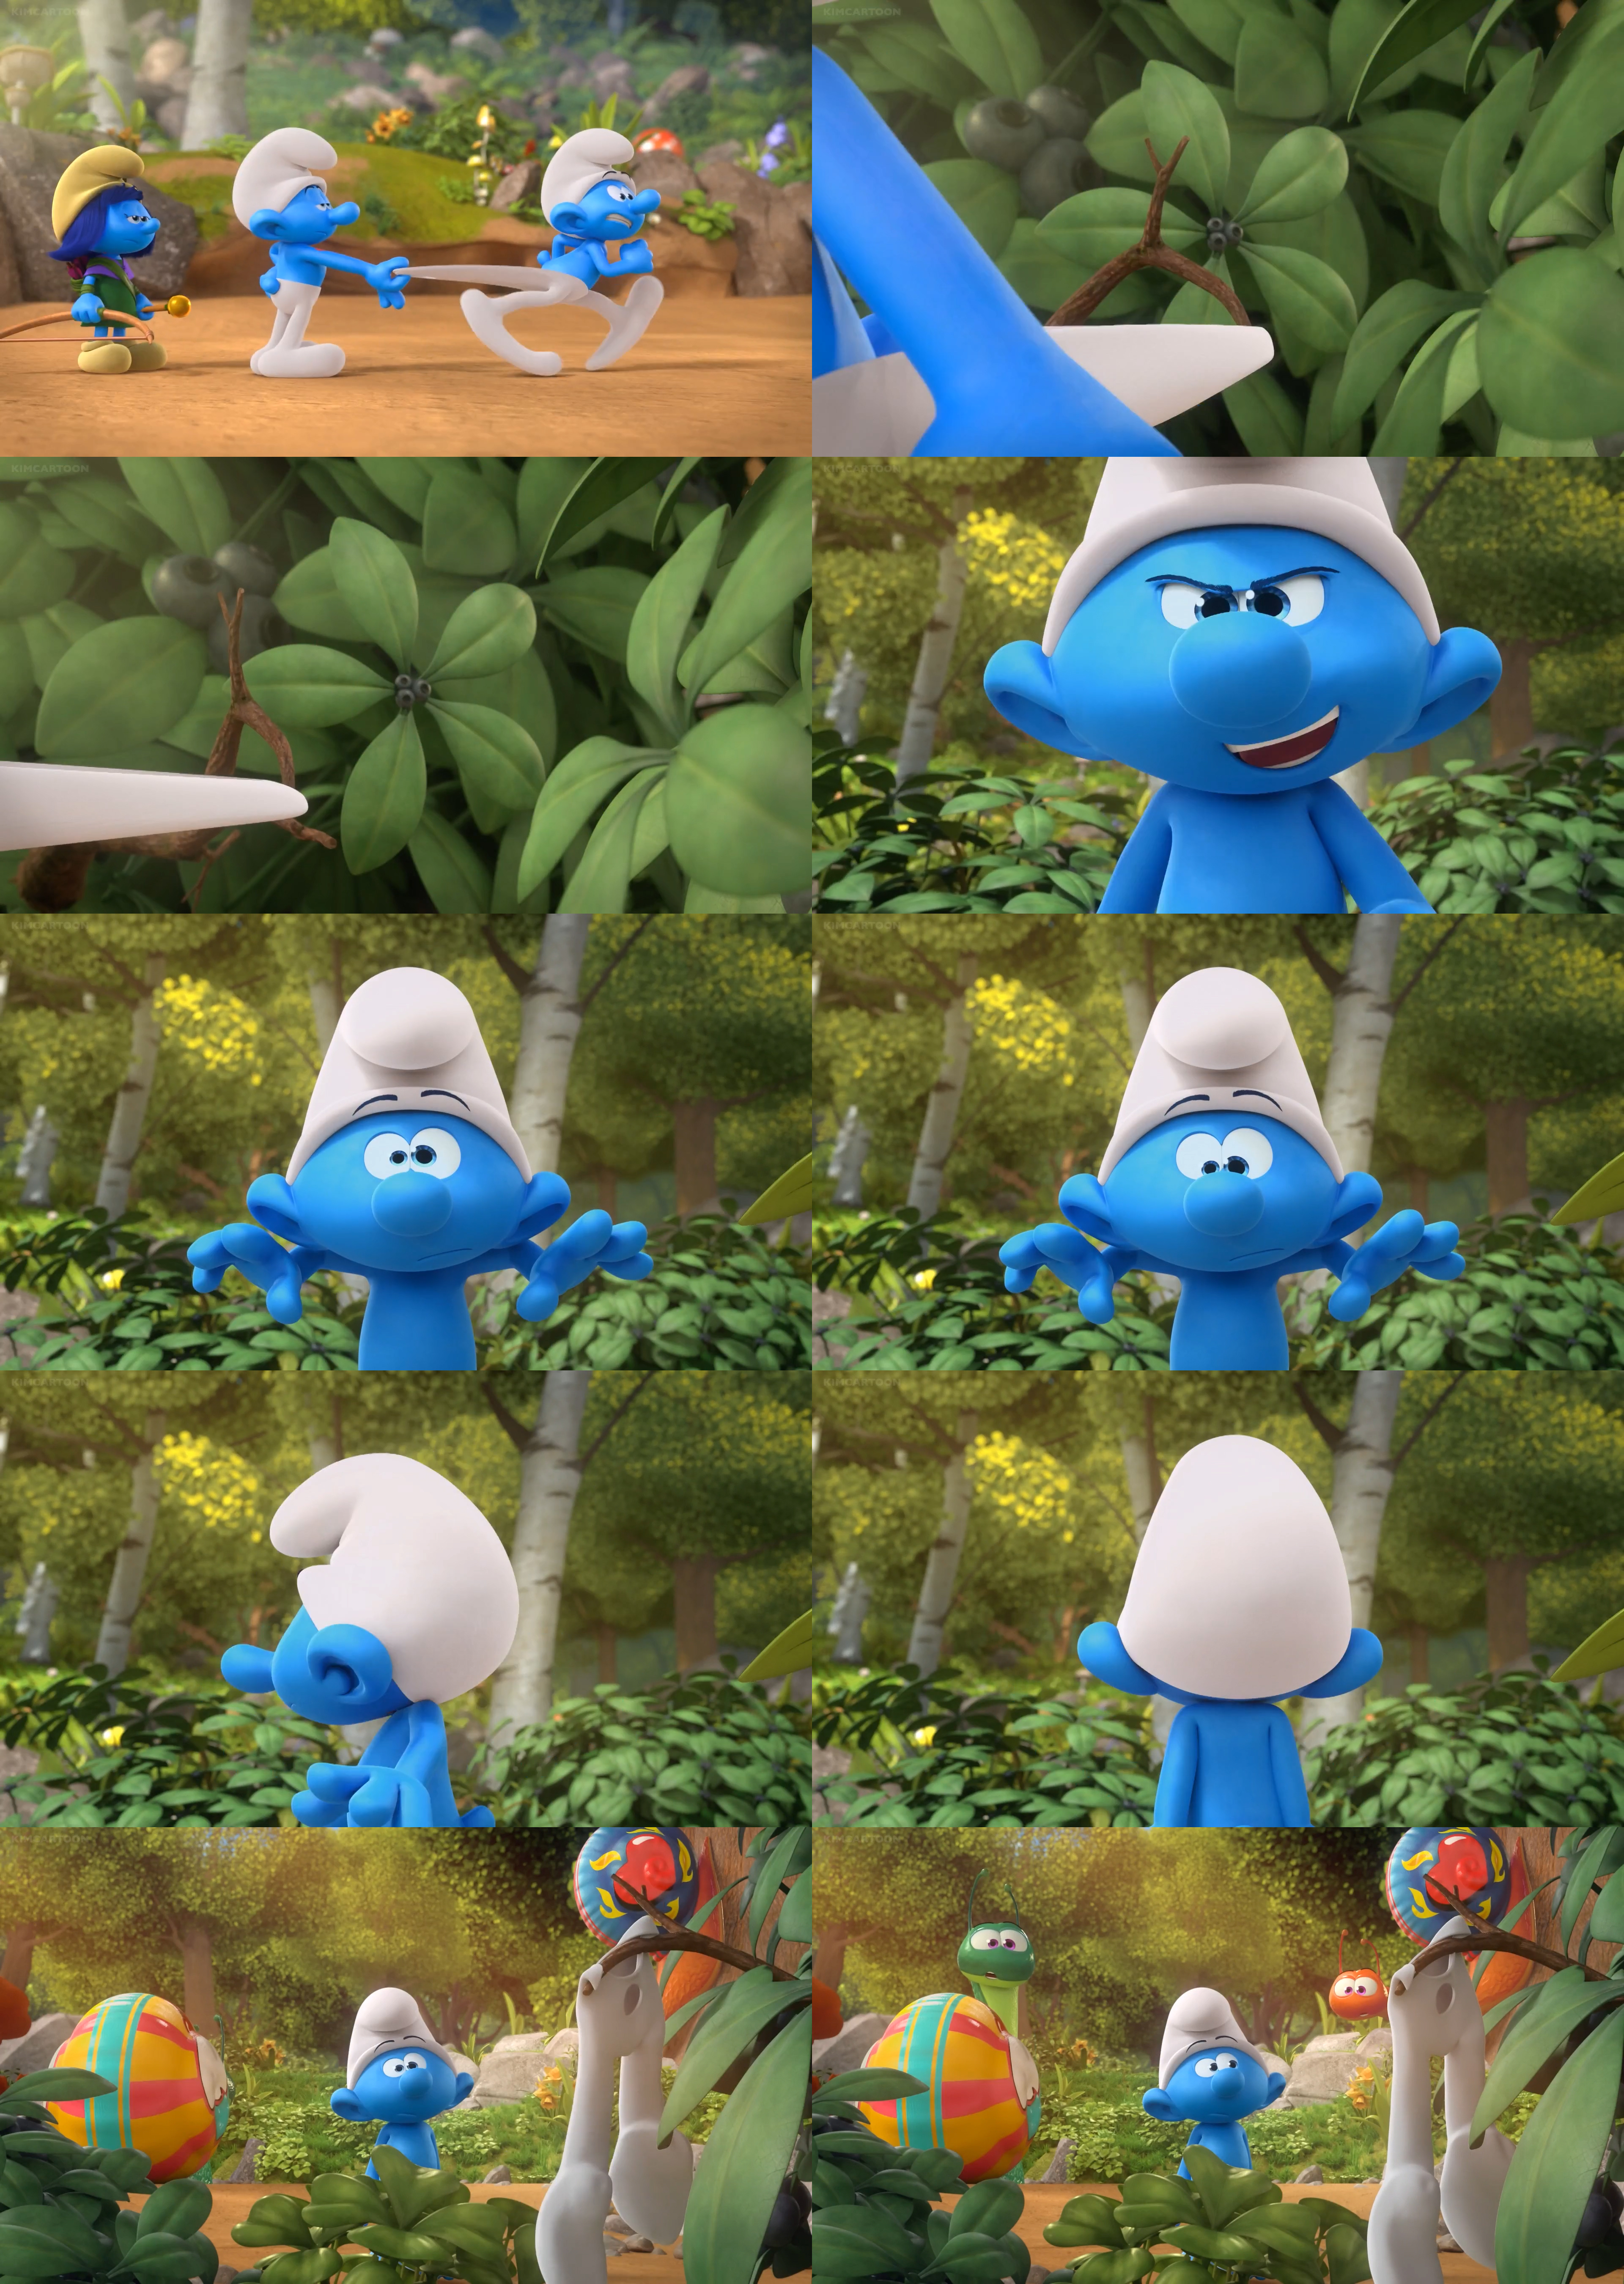 Smurfs Bubble Story episode 123 is up by RUinc on DeviantArt